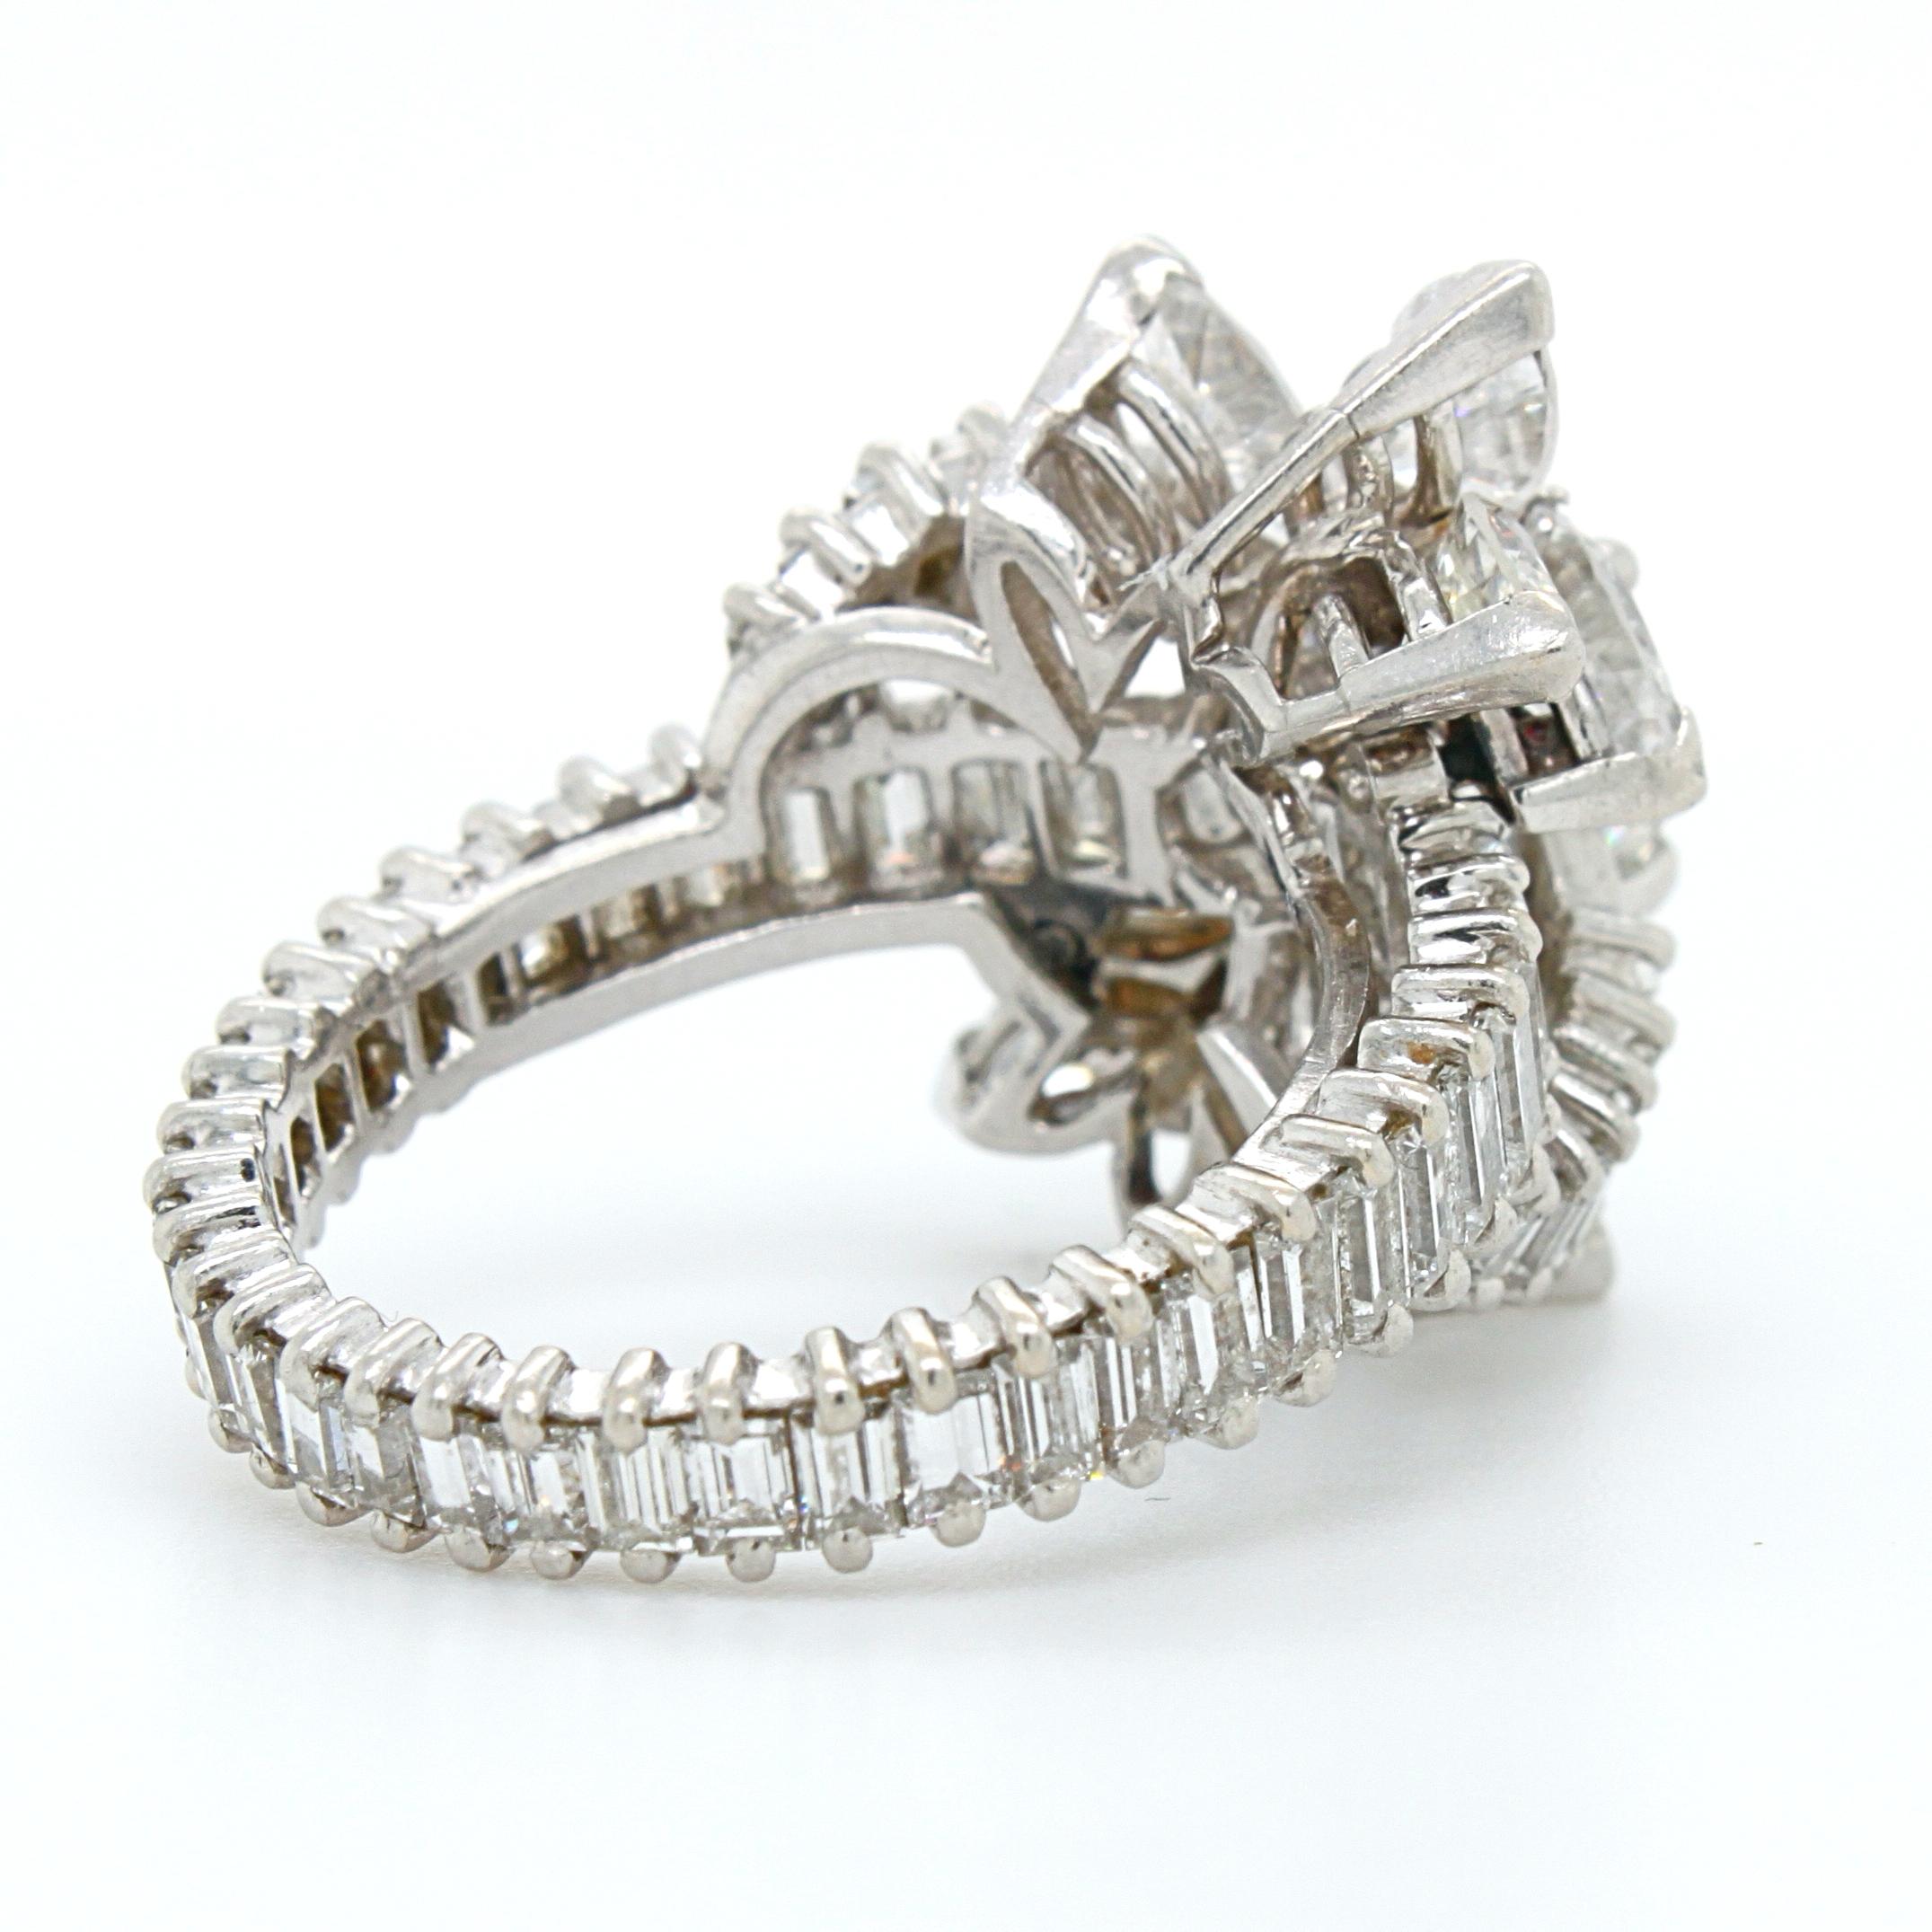 Diamond Solitaire Cocktail Ring, ca. 2.2ct, G/H-VS, 1970s In Excellent Condition For Sale In Idar-Oberstein, DE